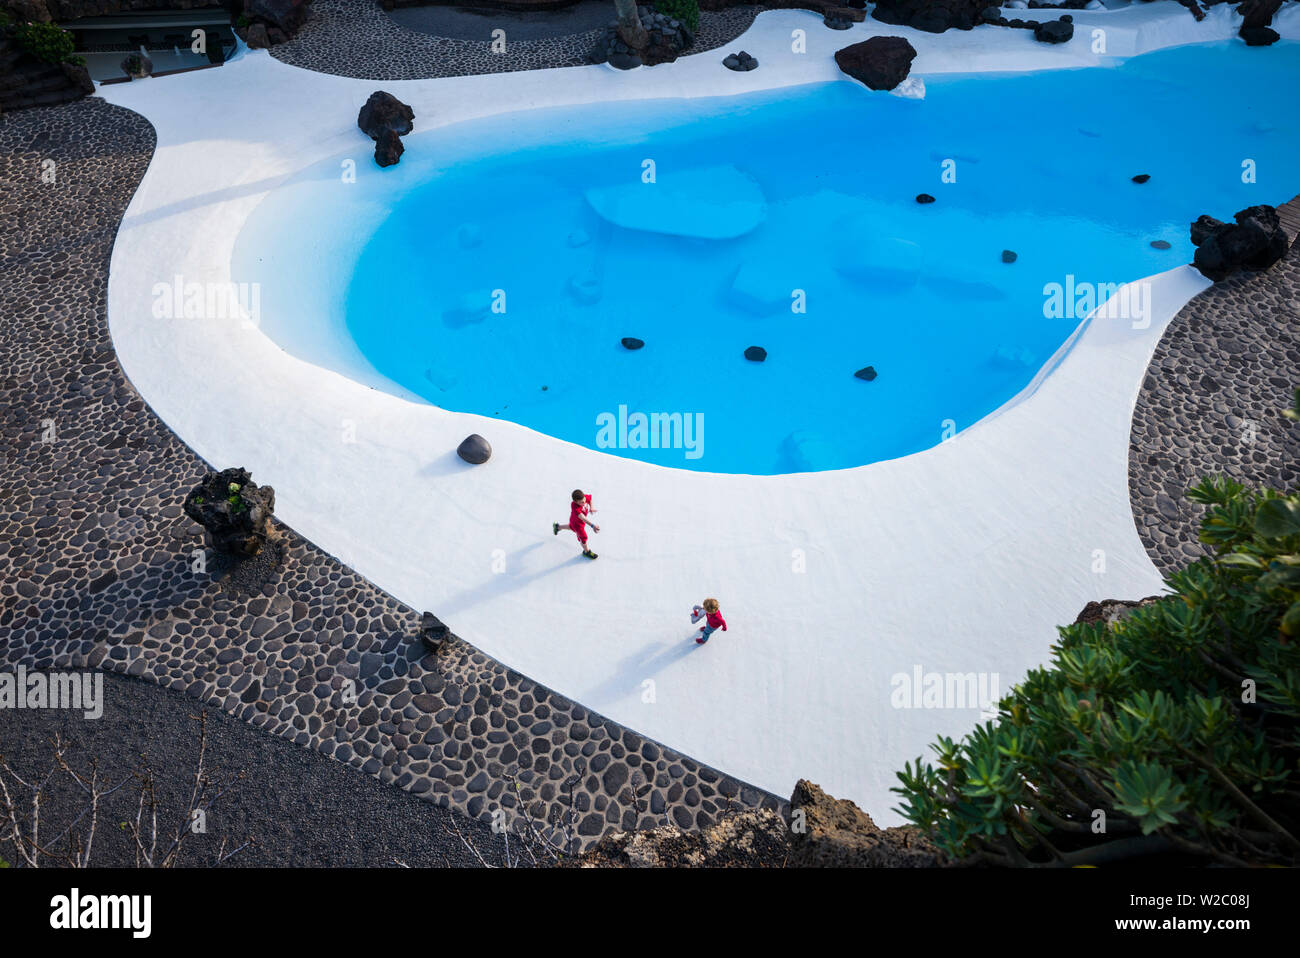 Spain, Canary Islands, Lanzarote, Jameos del Agua, complex inside old lava tube, designed by Cesar Manrique, exterior pool Stock Photo